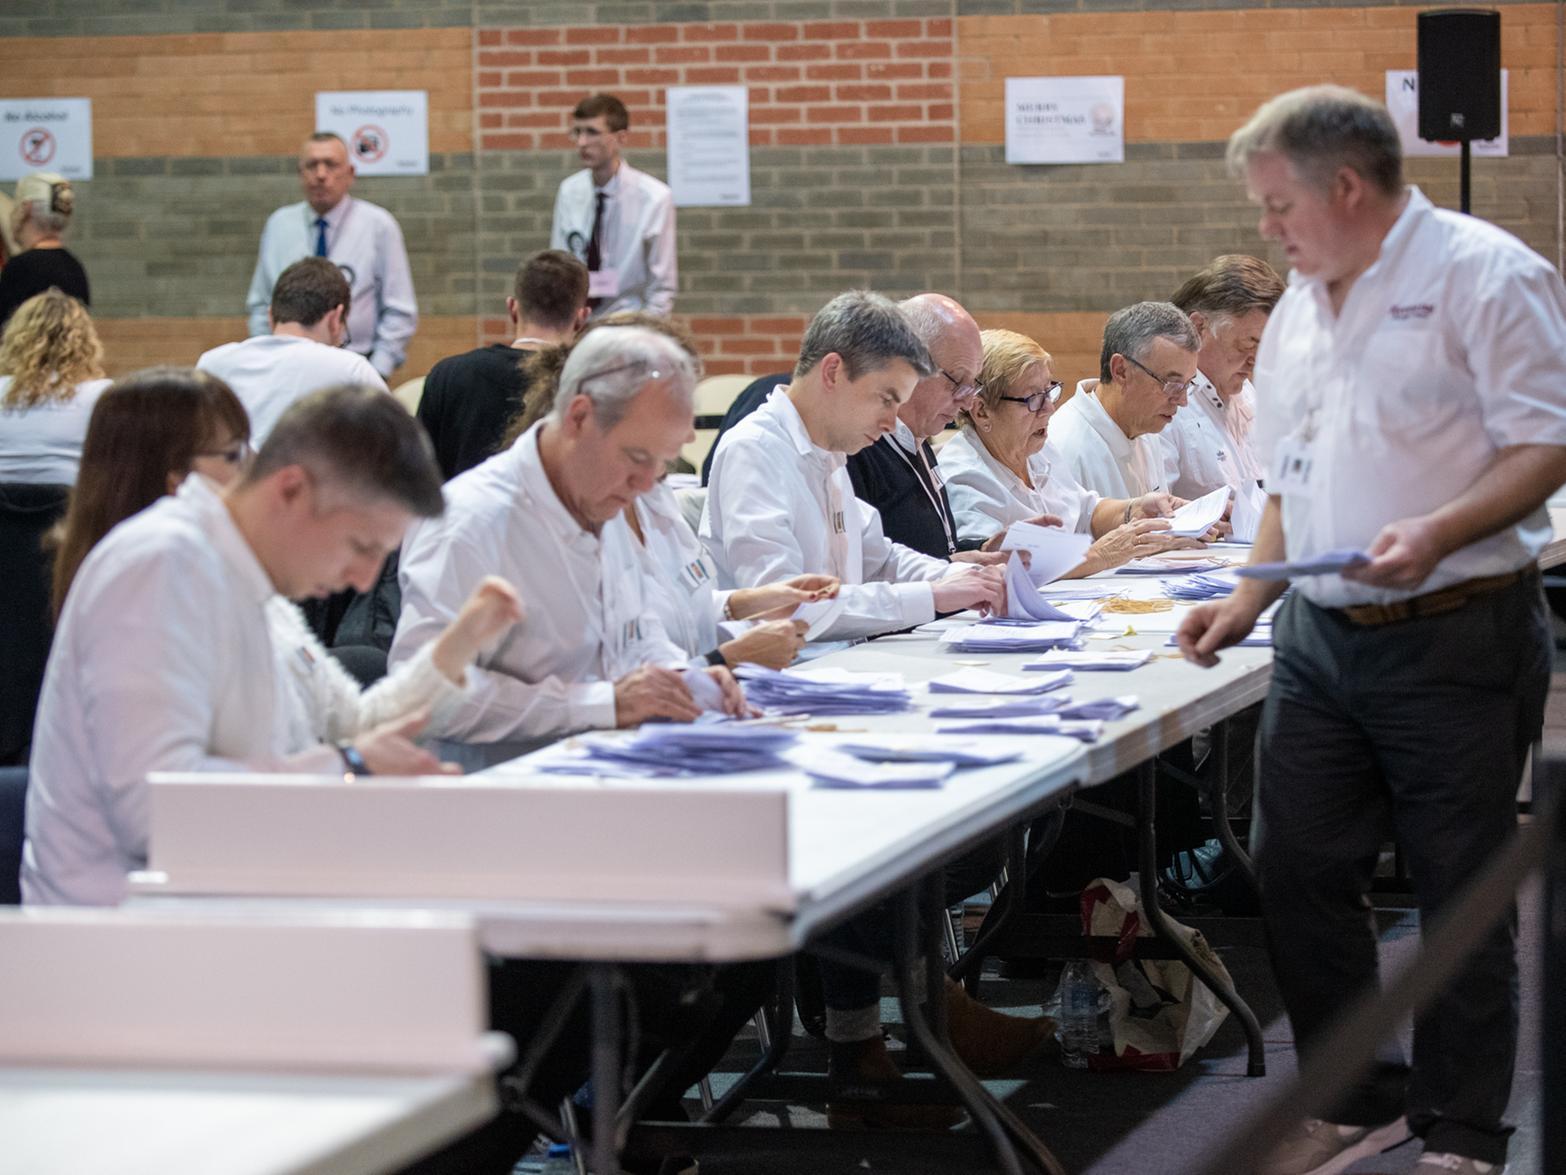 Counters spent about three hours working their way through 70 boxes of ballots